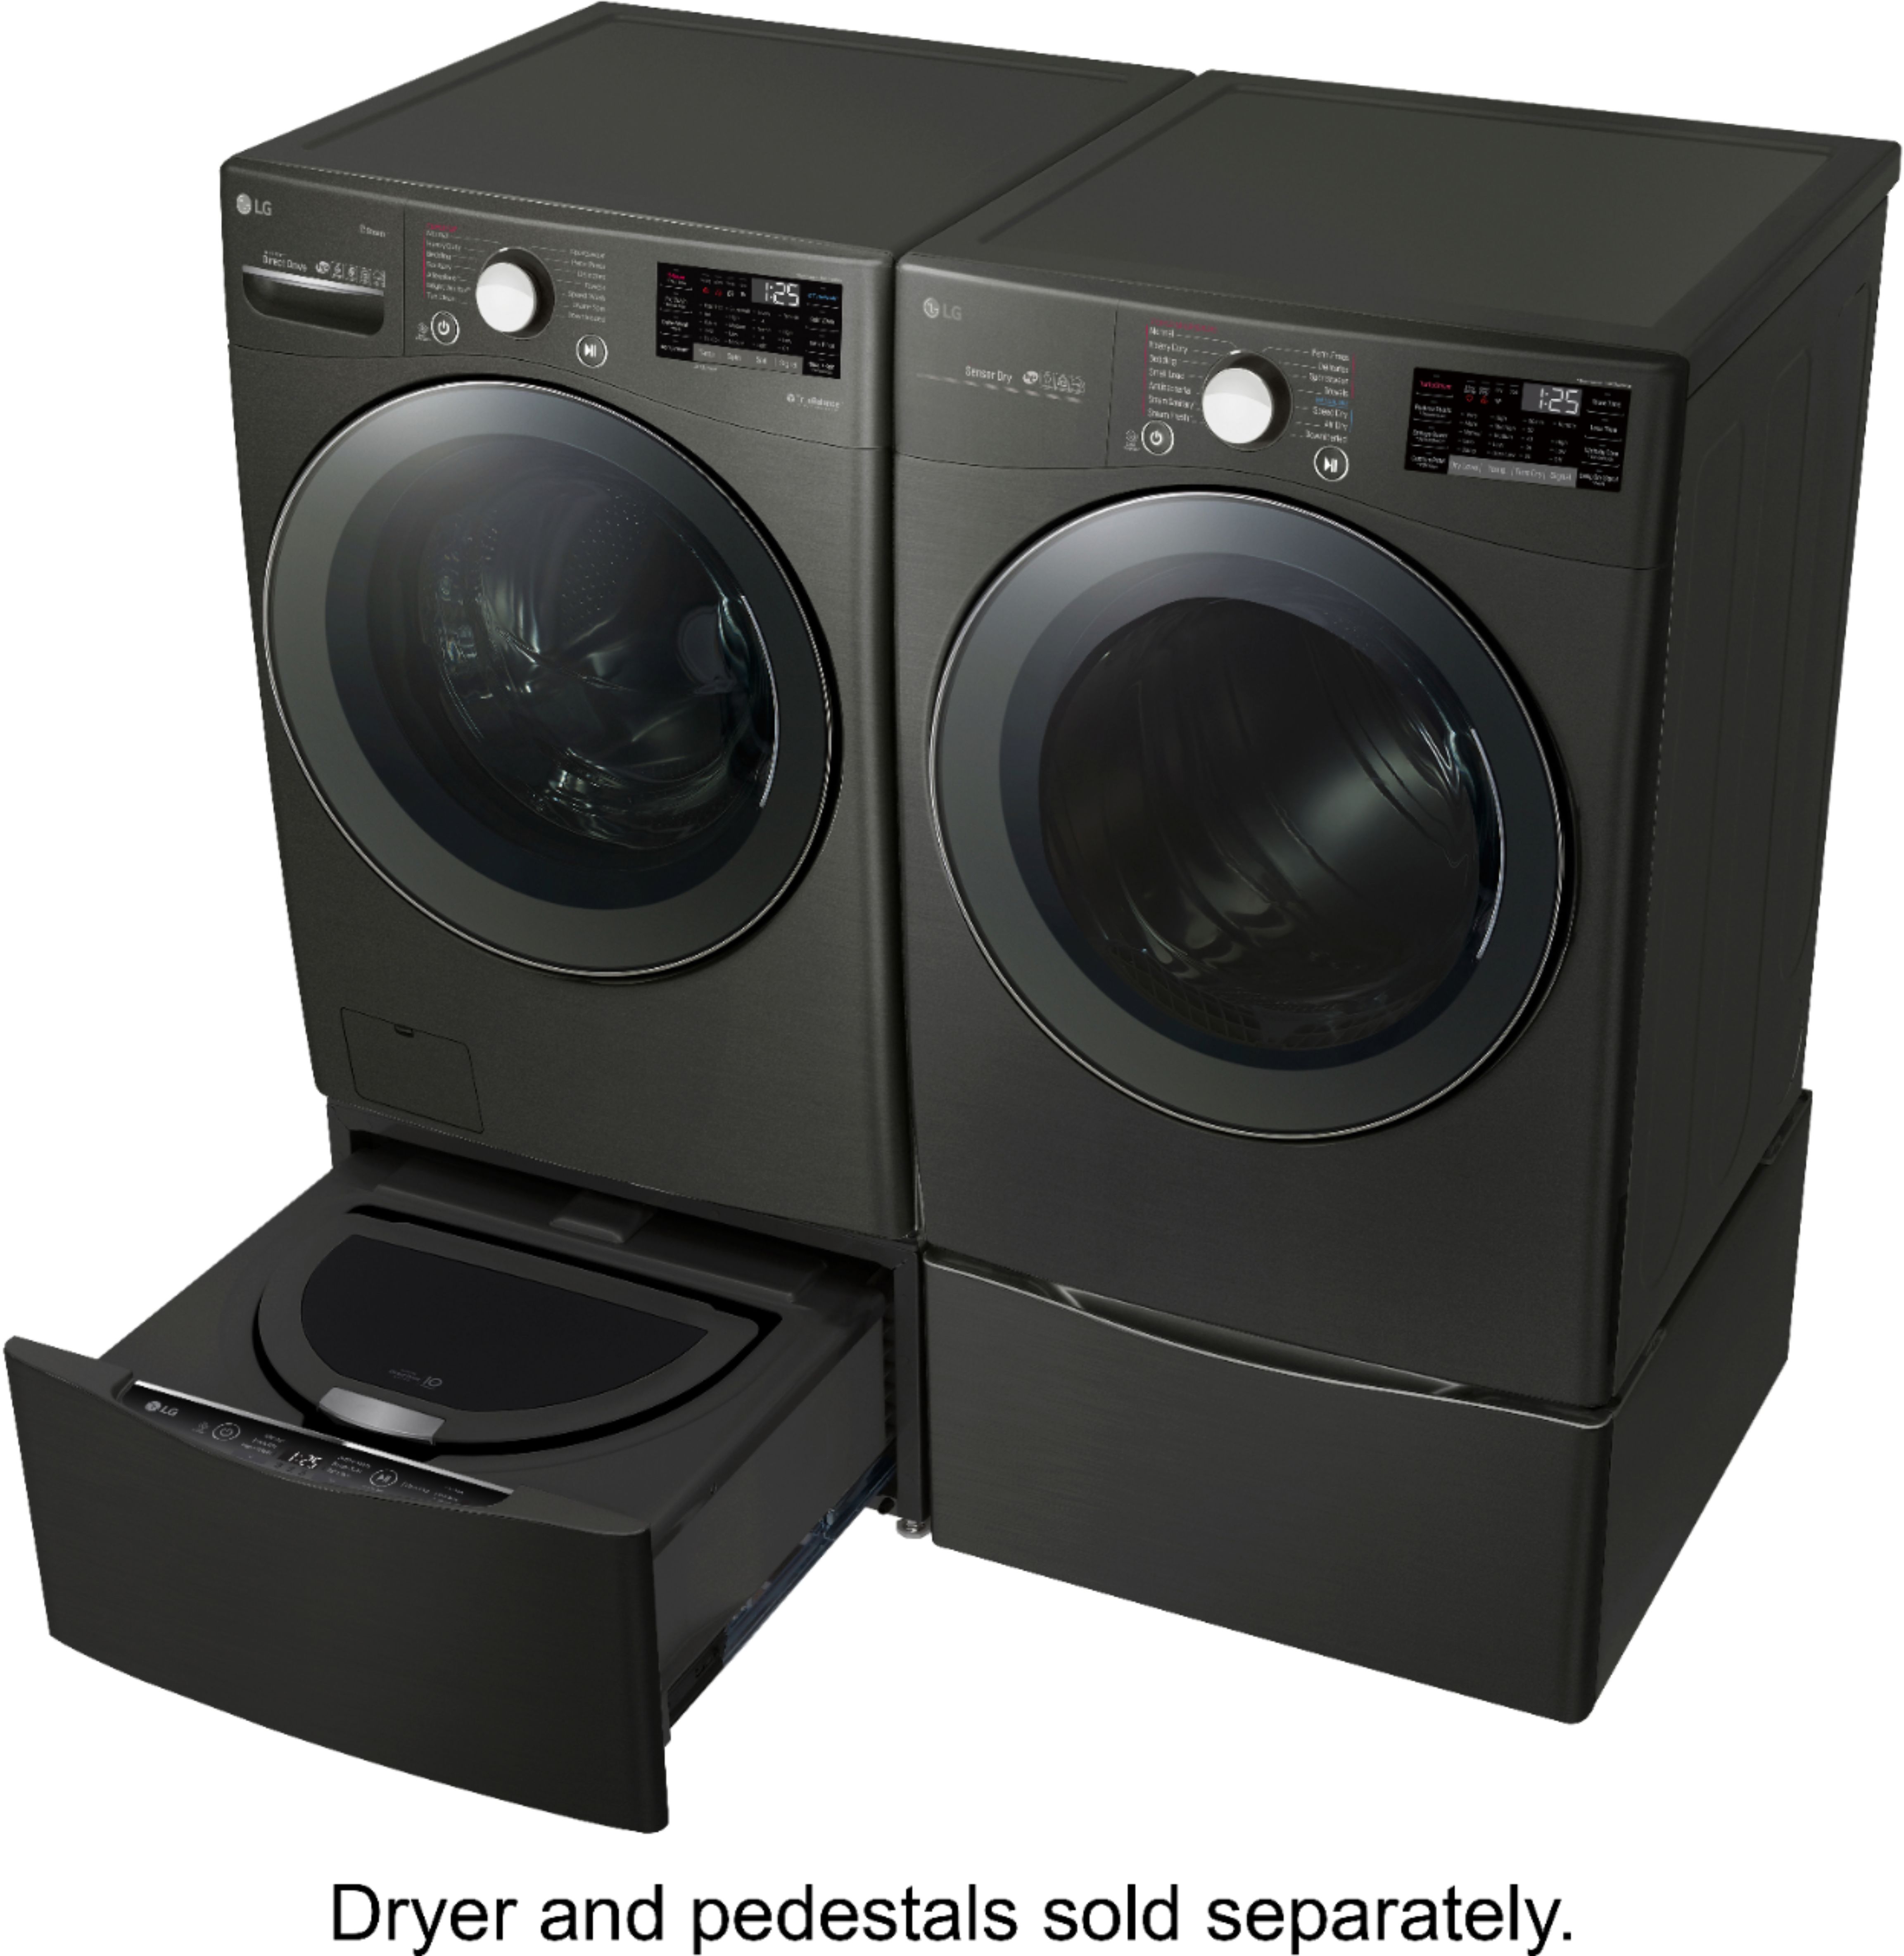 LG WM3998HBA 4.5 Cu. ft. Smart Wi-Fi Enabled All-in-One Washer/Dryer